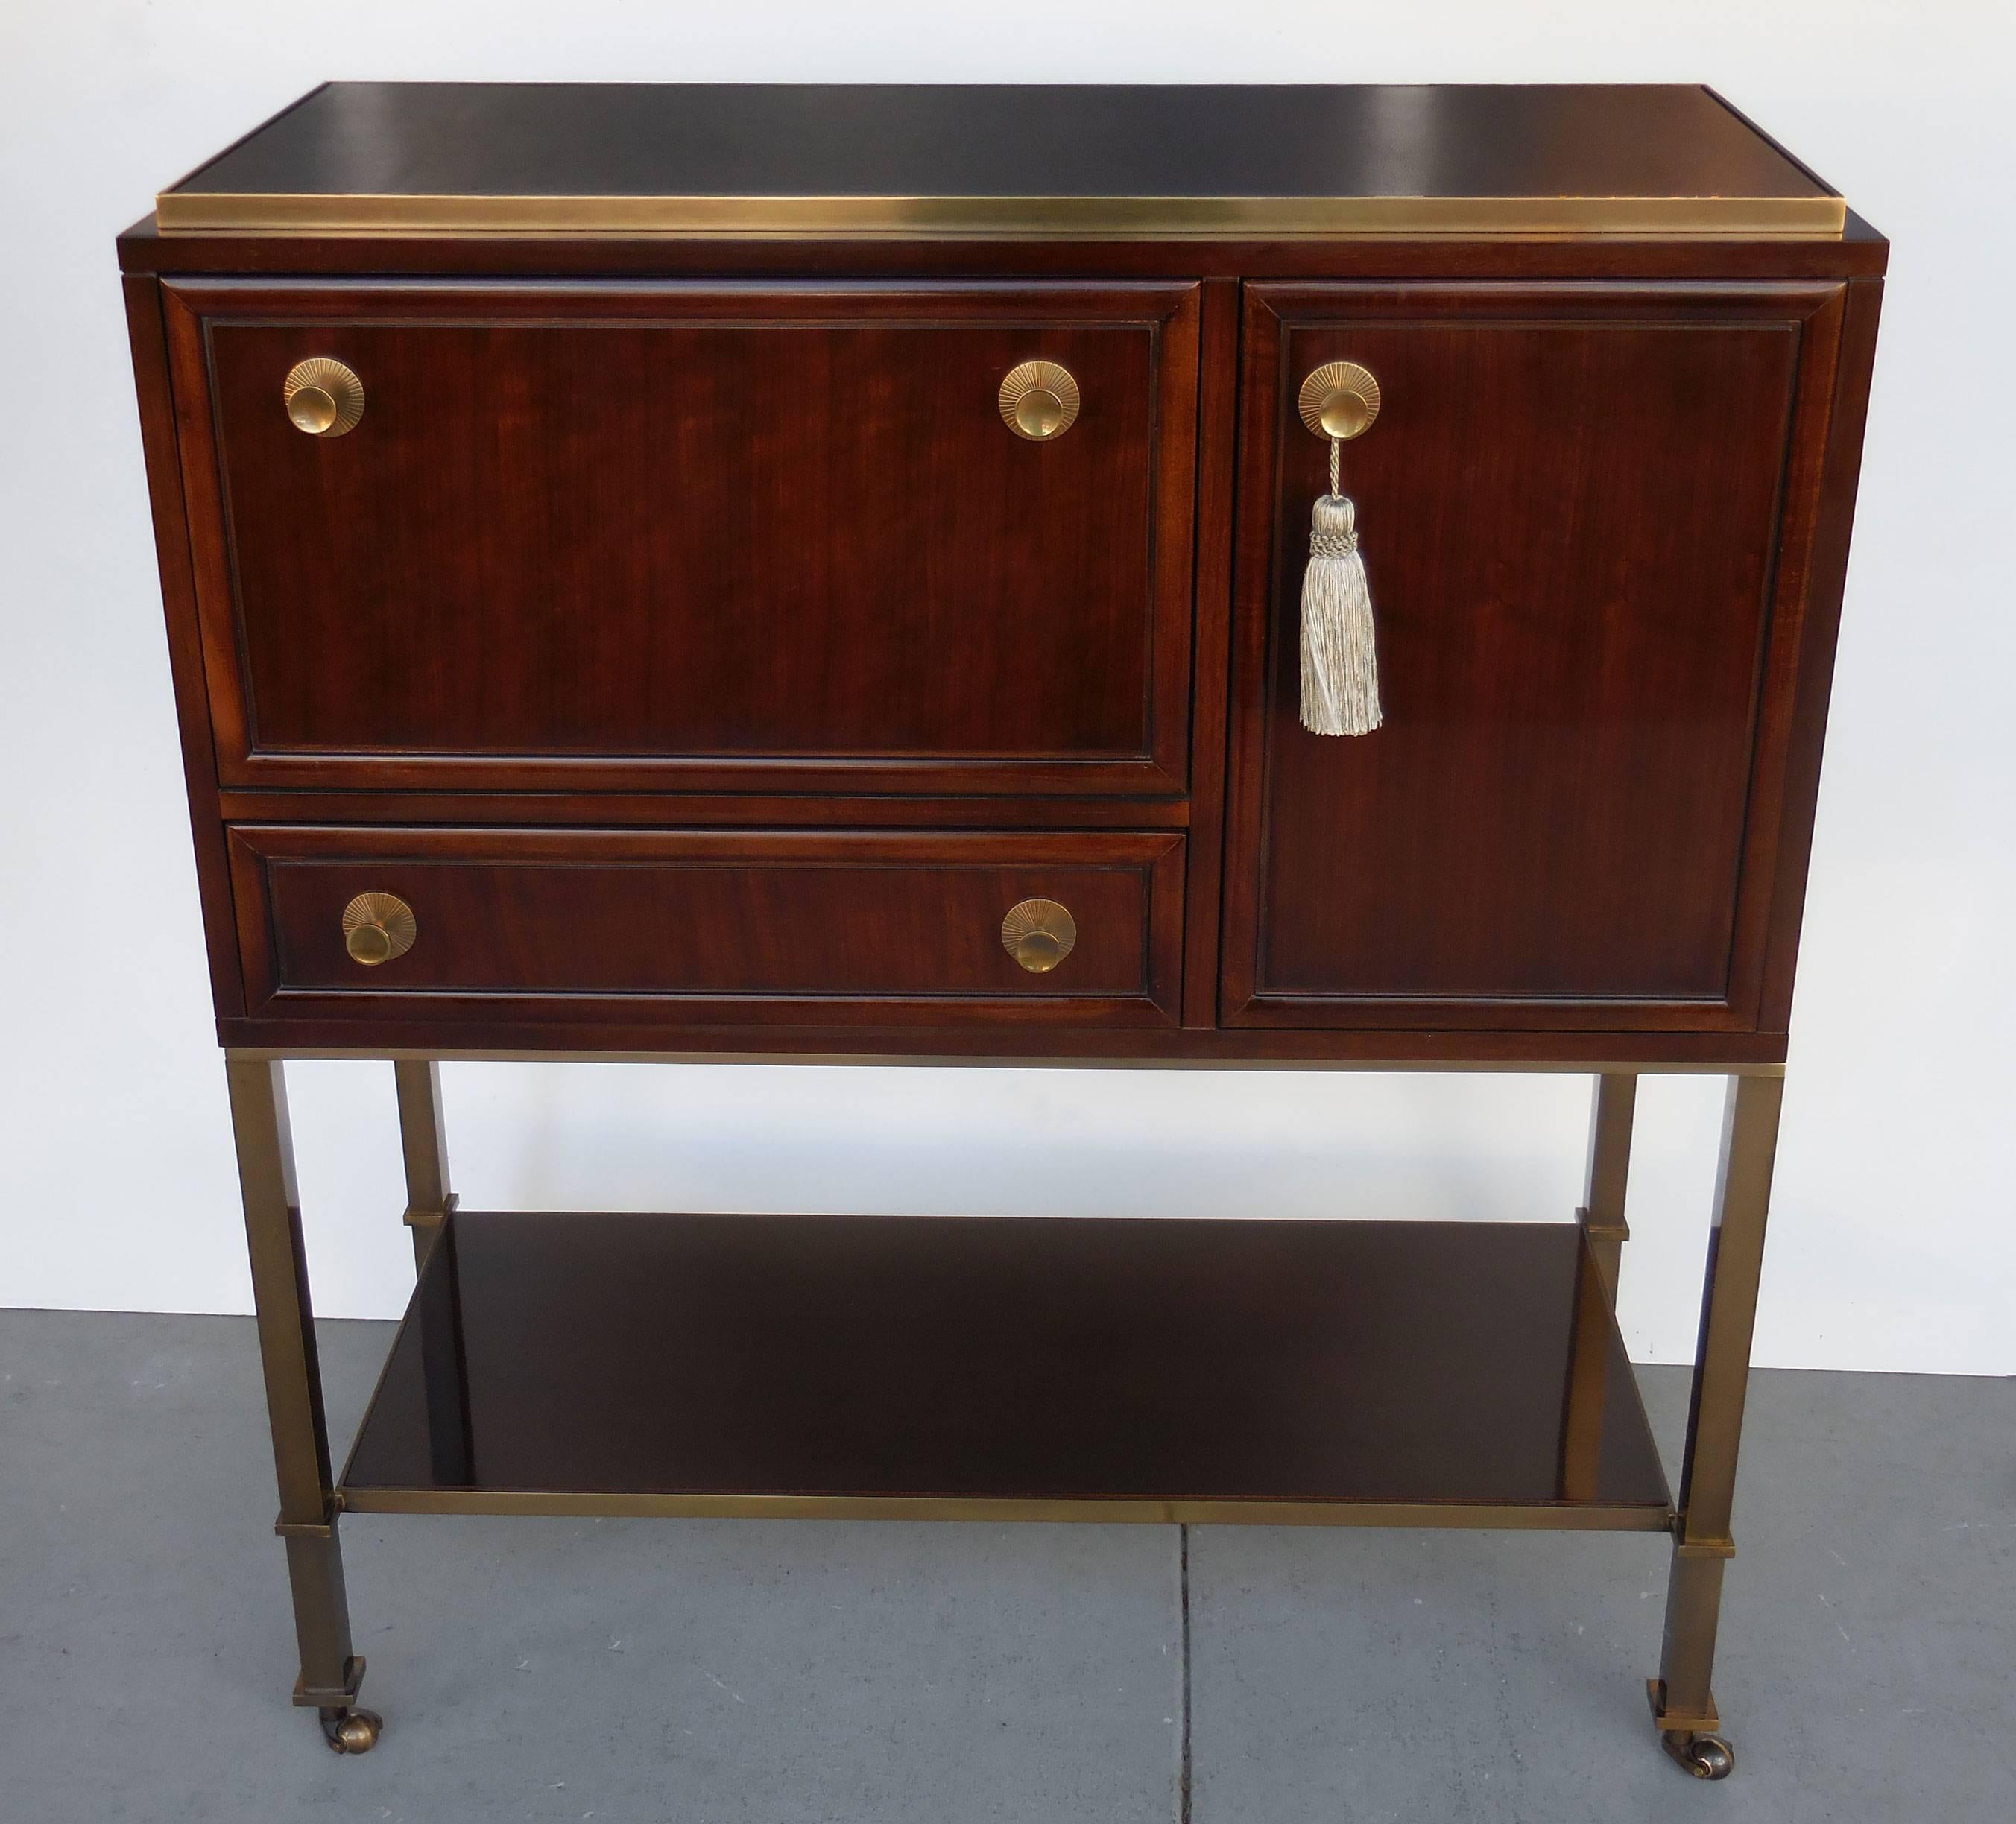 Exquisite cabinet. The base is made of heavy brass with solid brass casters. Pulls are finely cast brass as well as the edge around the leather top. Ample storage, pull down front on bar compartment that also has a mirror on the back, the door